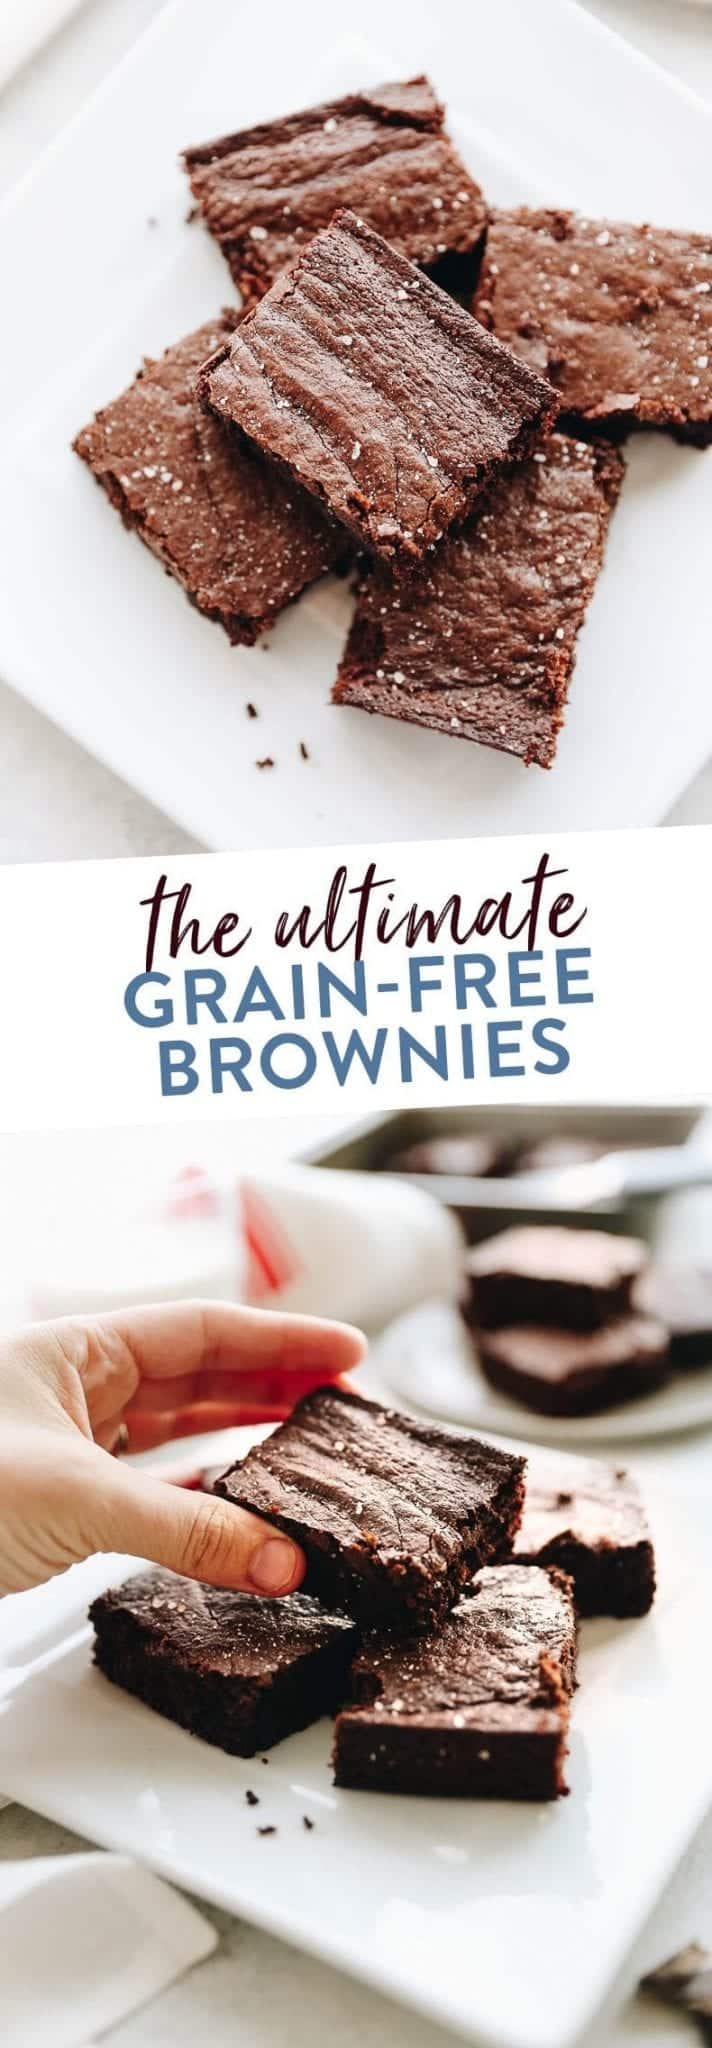 The ultimate grain-free brownies - flourless, decadent, fudgy and healthy, these grain-free brownies will become your favorite dessert recipe on first bite.